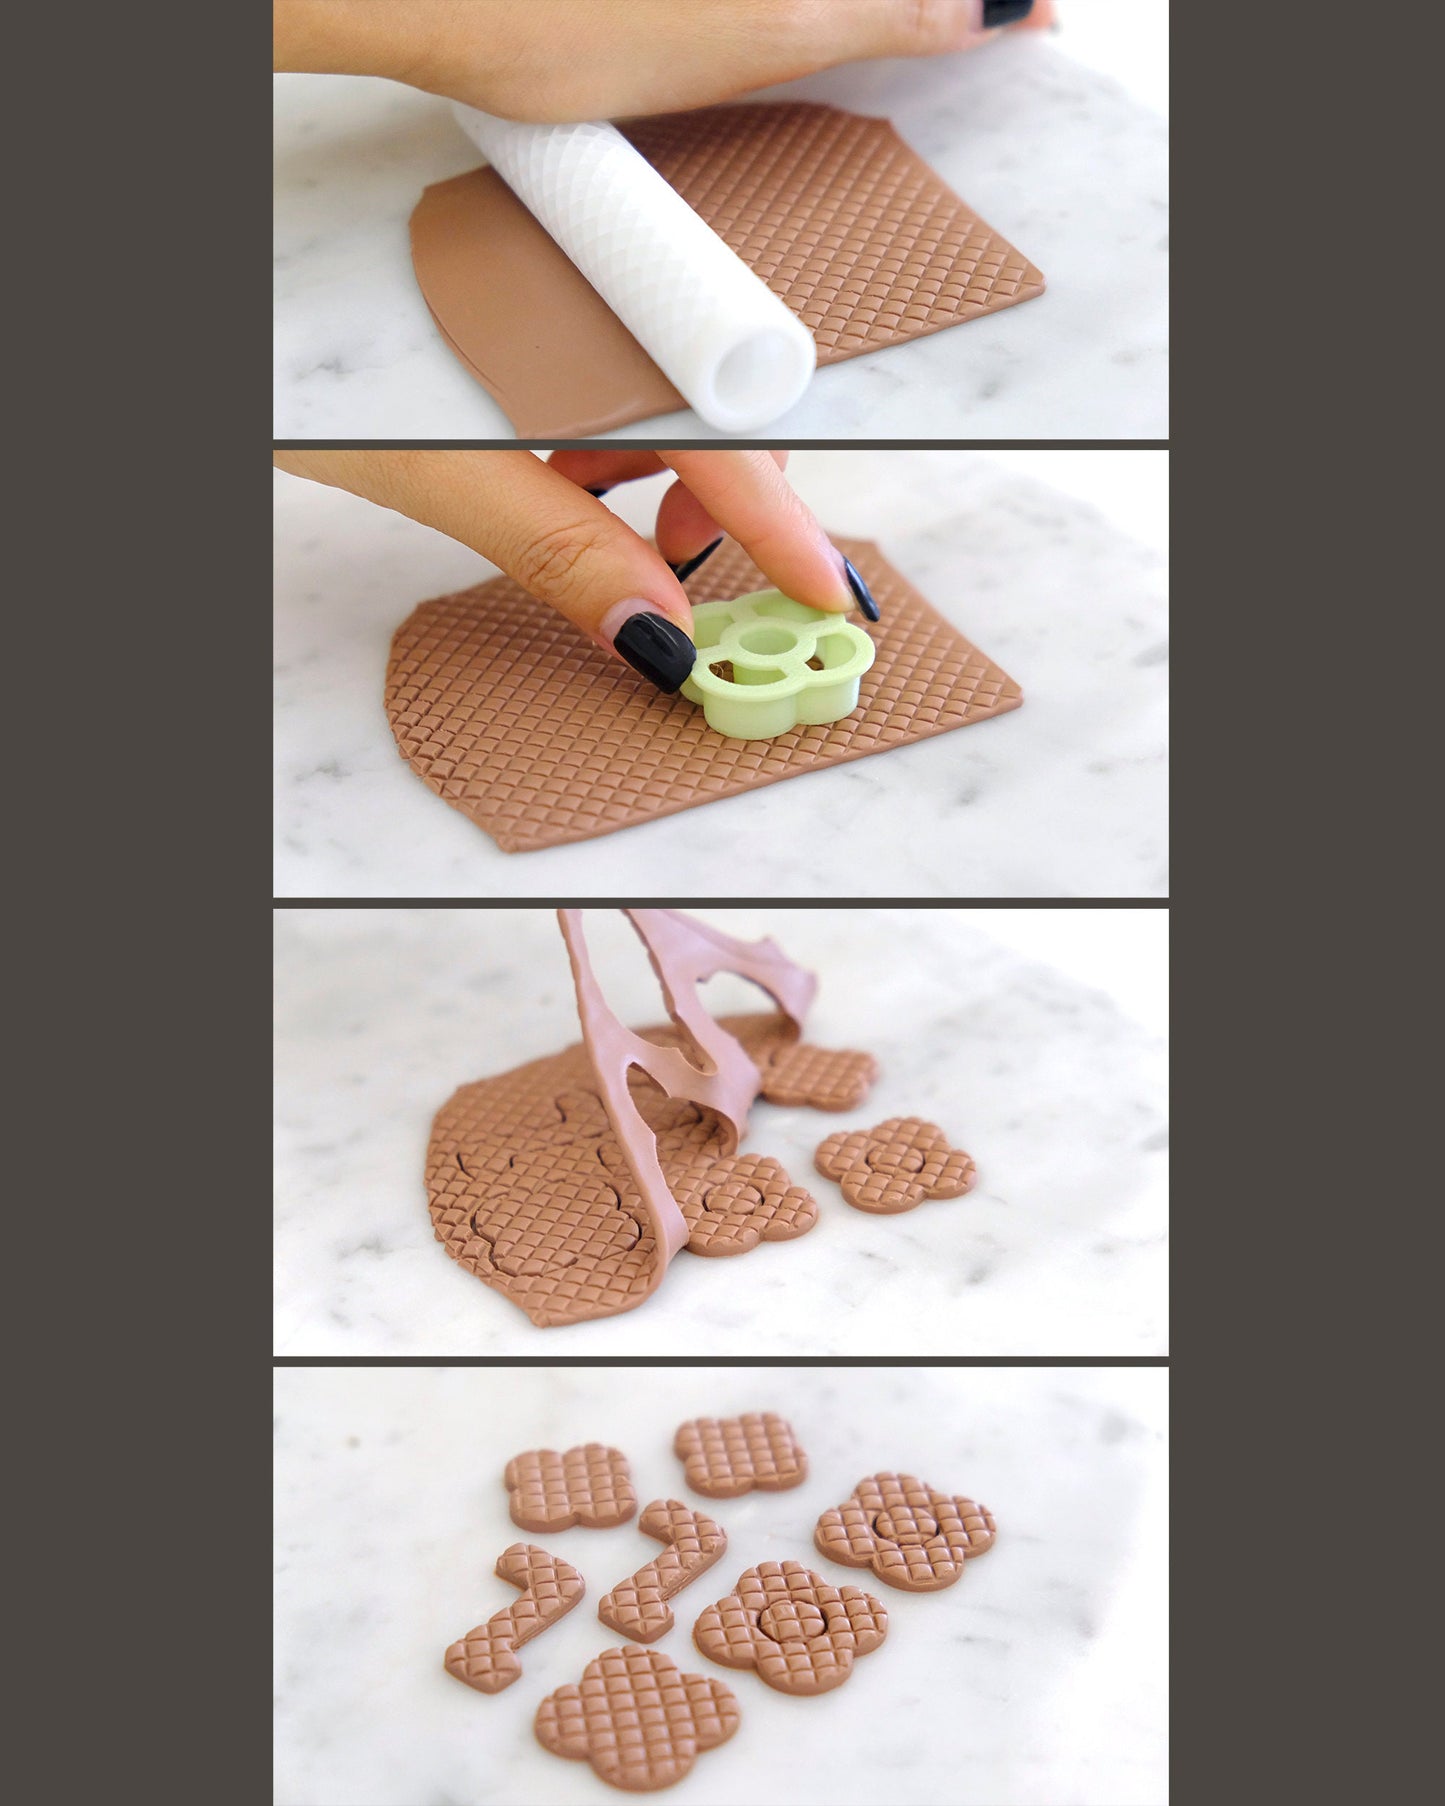 Hearts Clay Texture Roller for Earrings Making